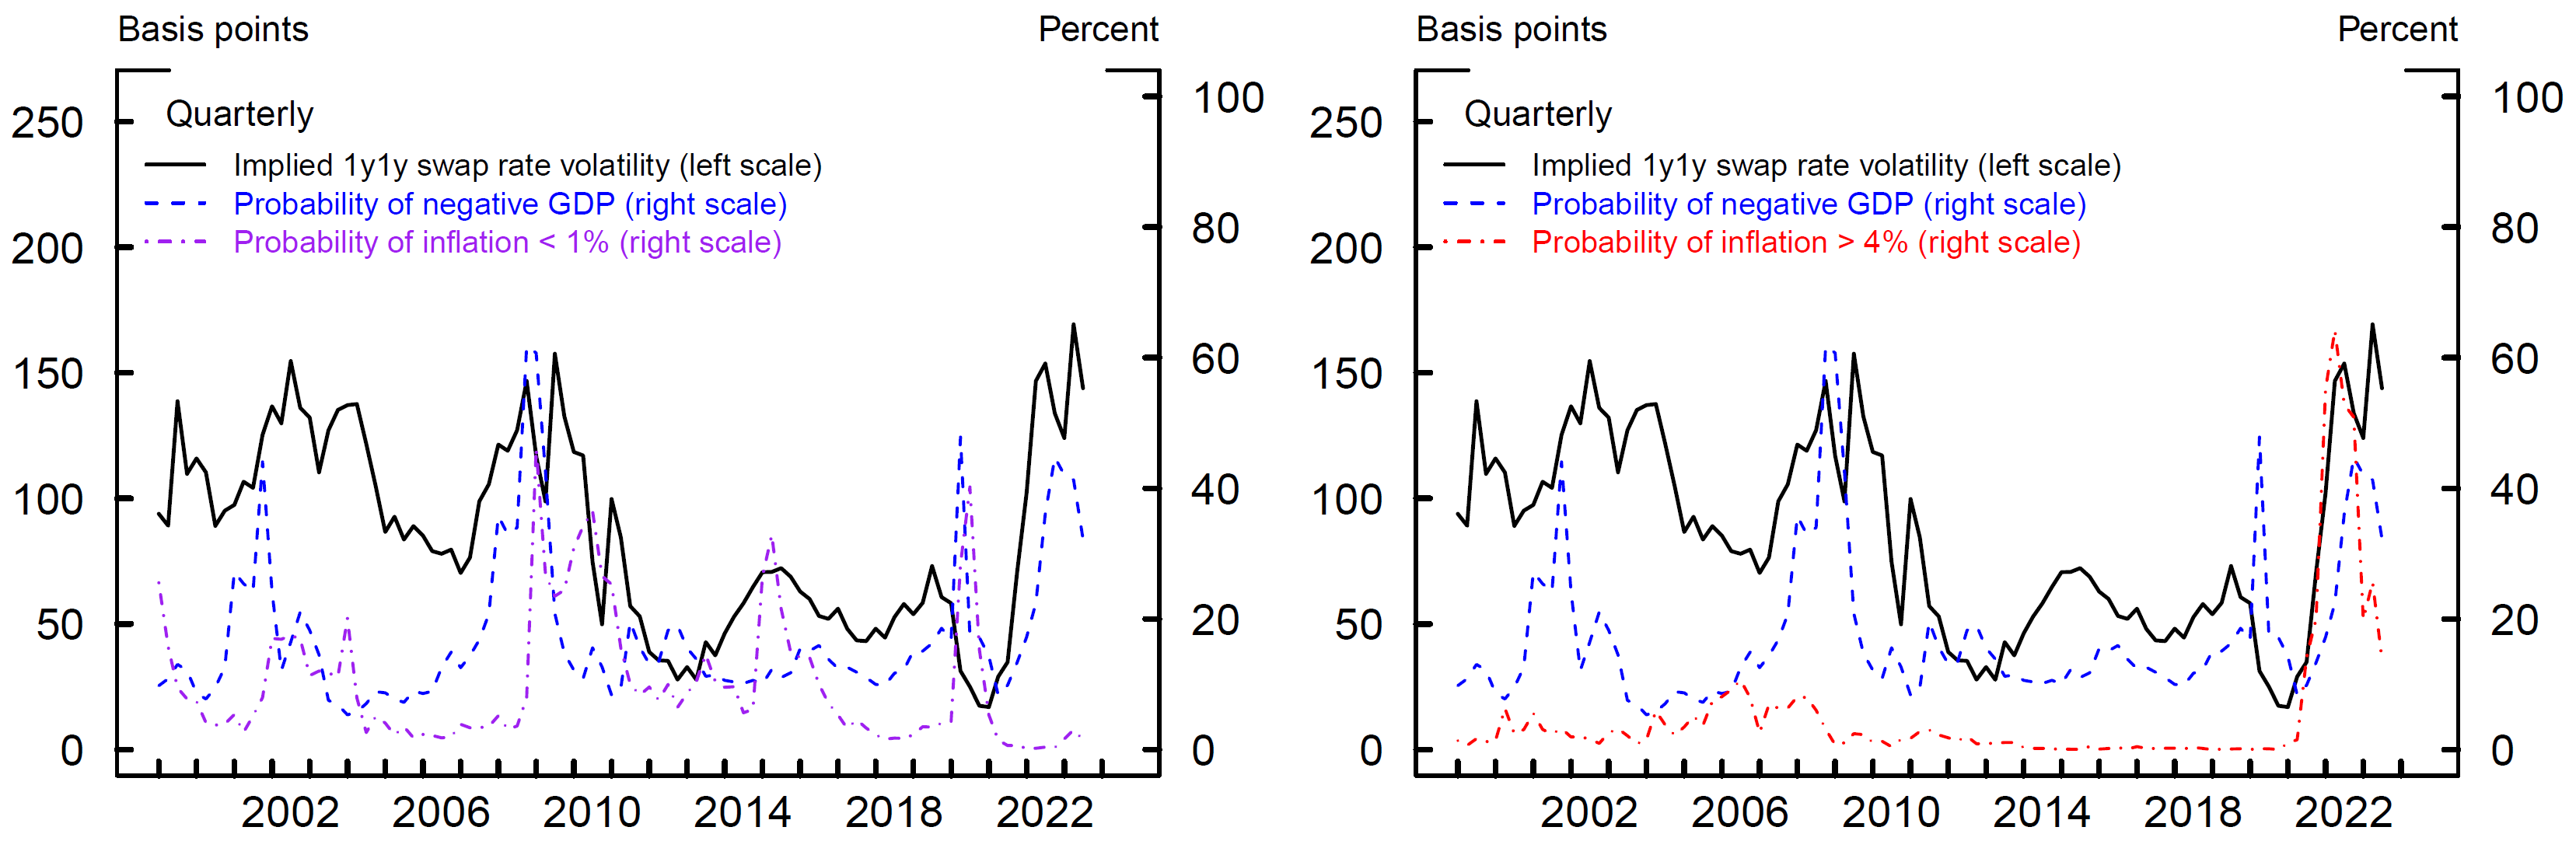 Figure 2. Interest Rate Volatility and Survey−Based Measures of Risks to GDP Growth and Inflation. See accessible link for data.